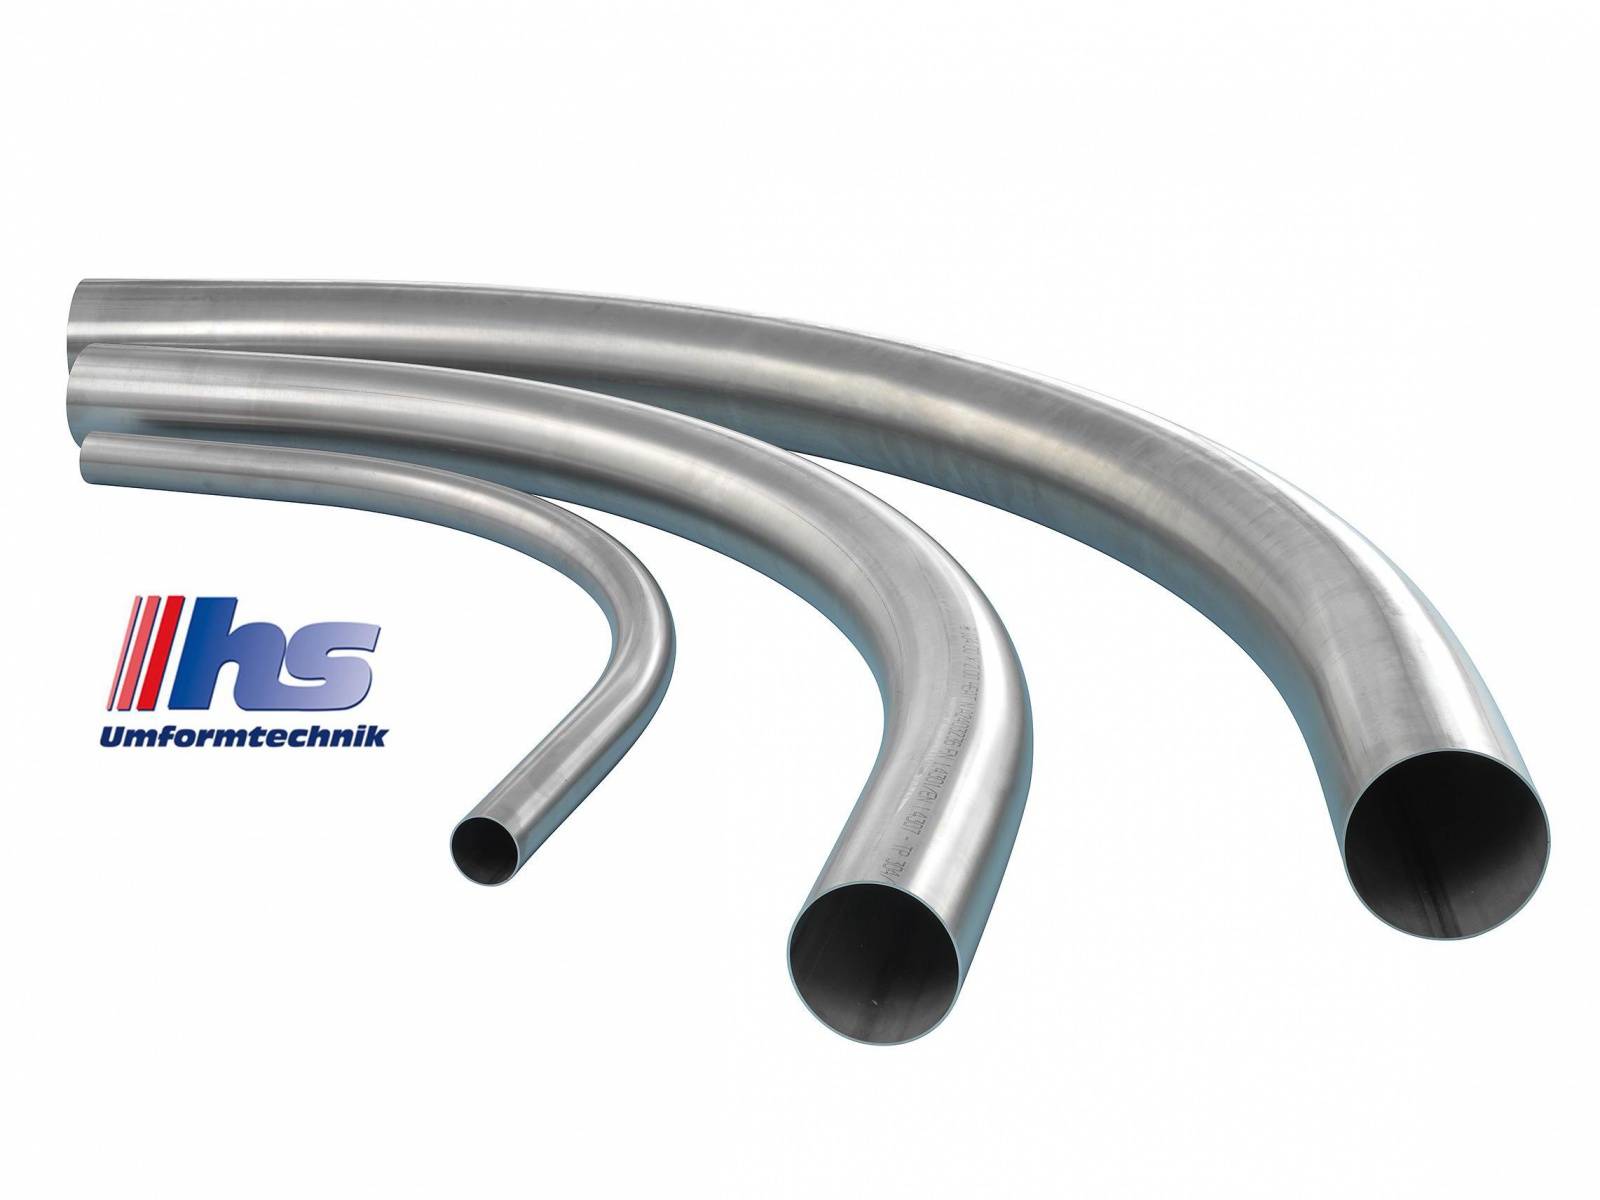 Stainless steel pipe bends for pneumatic conveyors immediately, ex stock